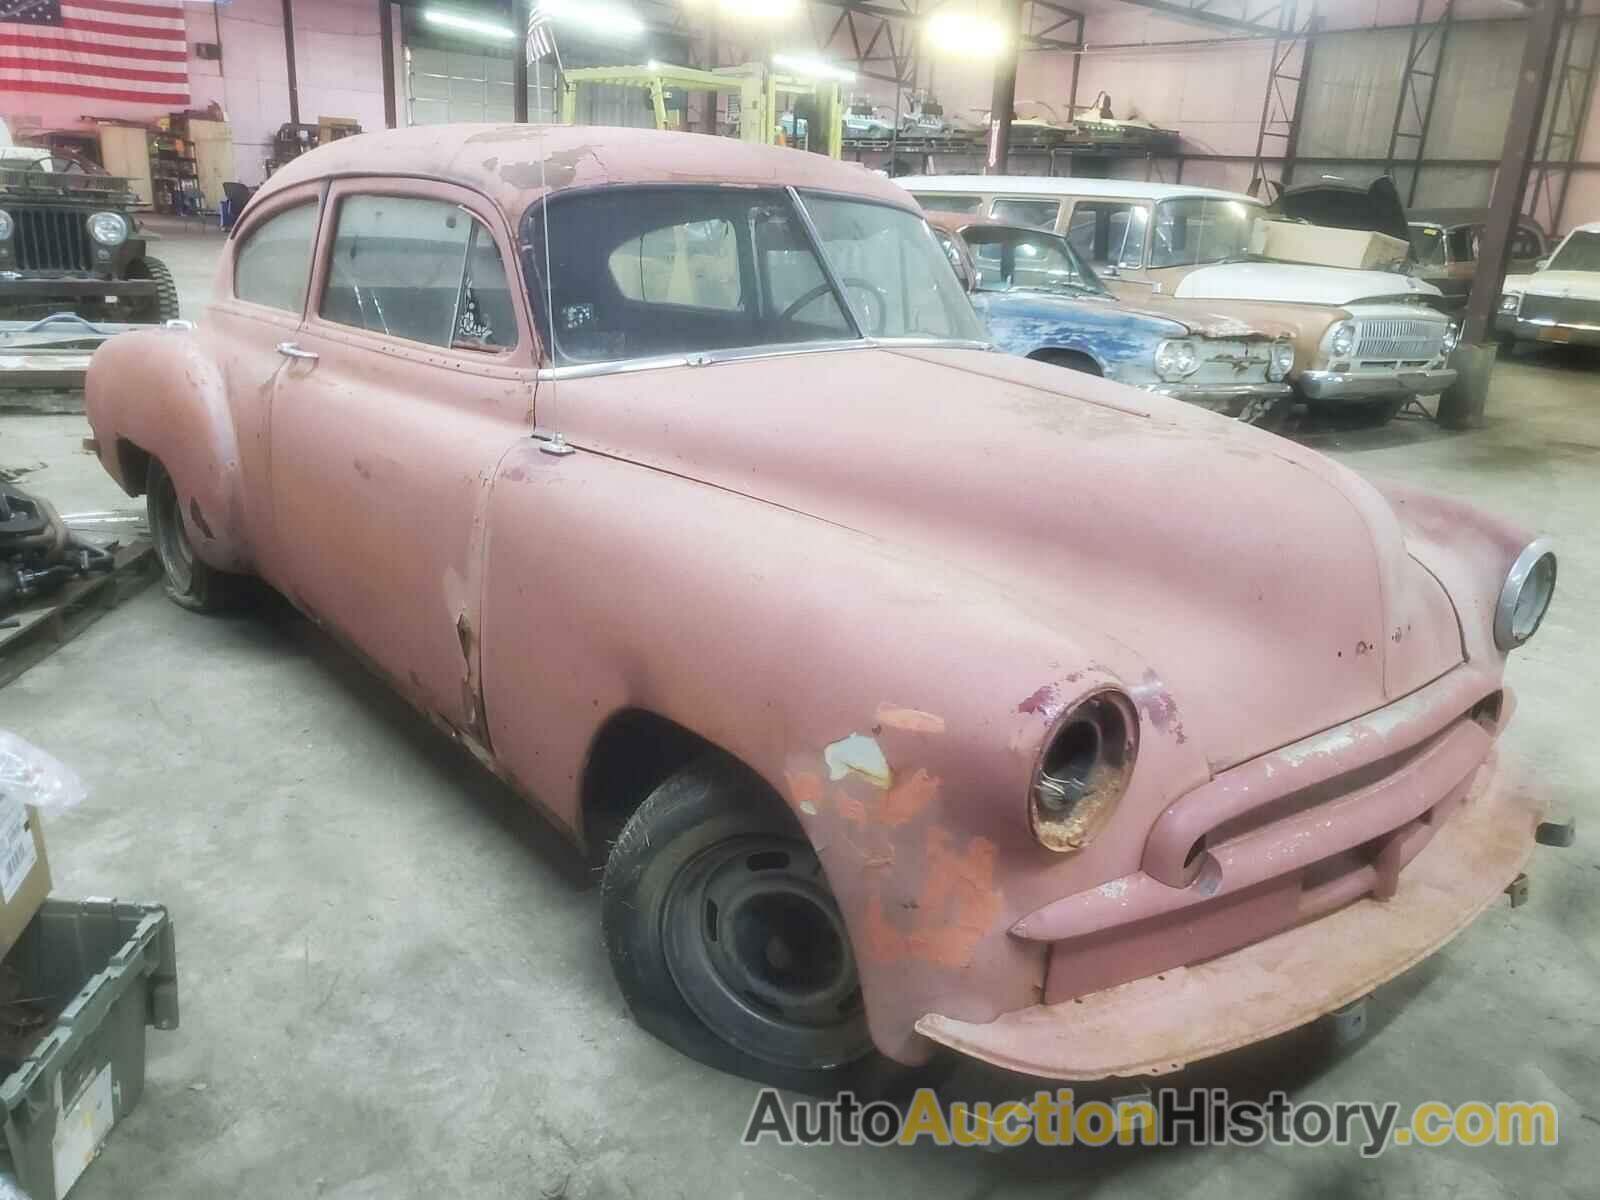 1949 CHEVROLET ALL OTHER, 39JE15337